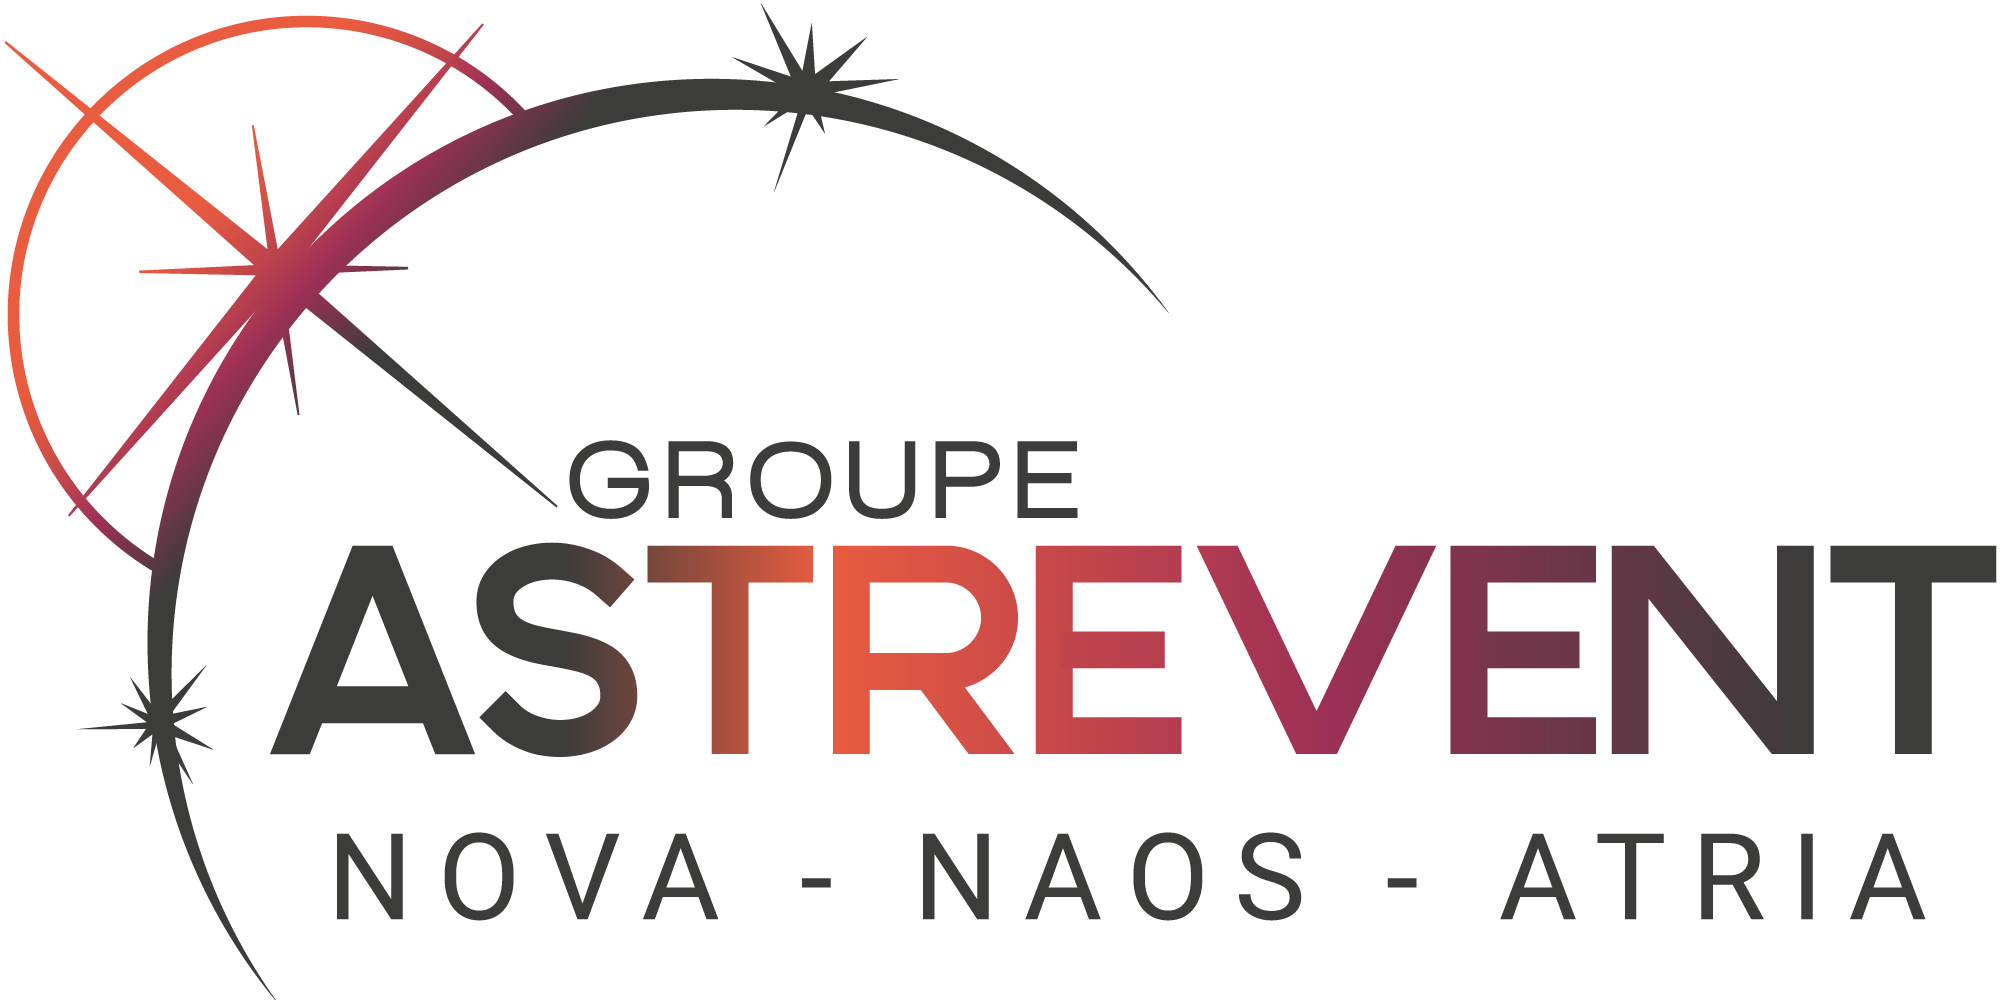 Groupe astrevent global couleur